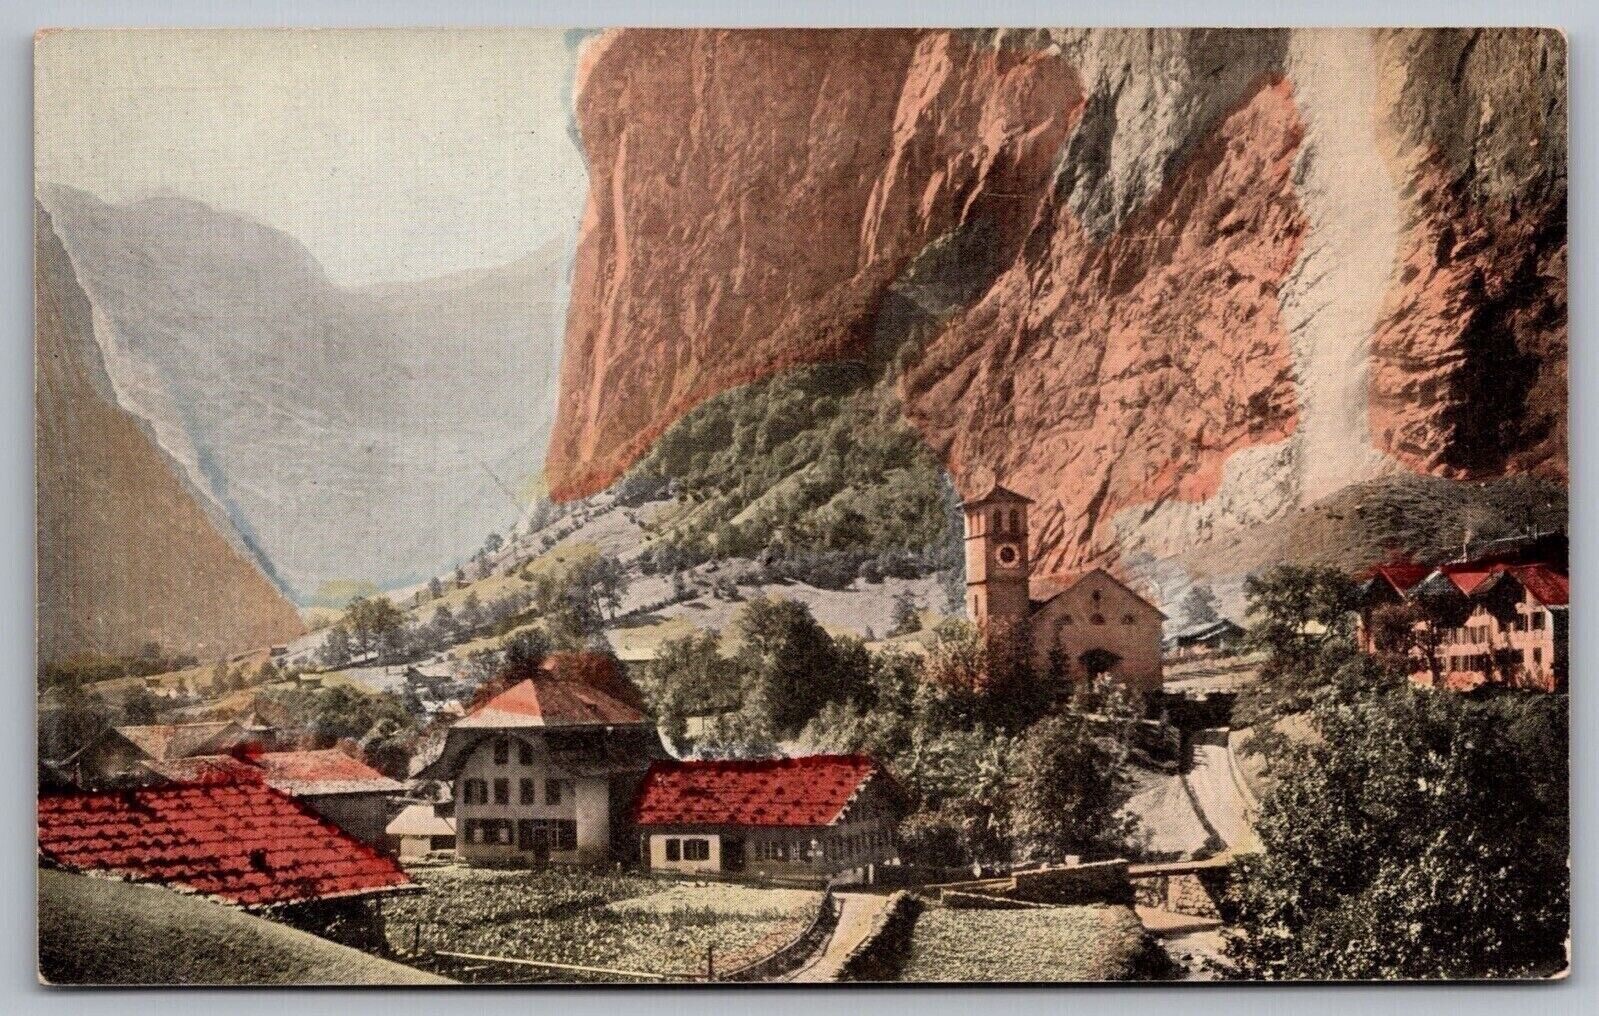 Lauterbrunner Straubach Falls Valley Town Swiss Alps Mountains Vintage Postcard